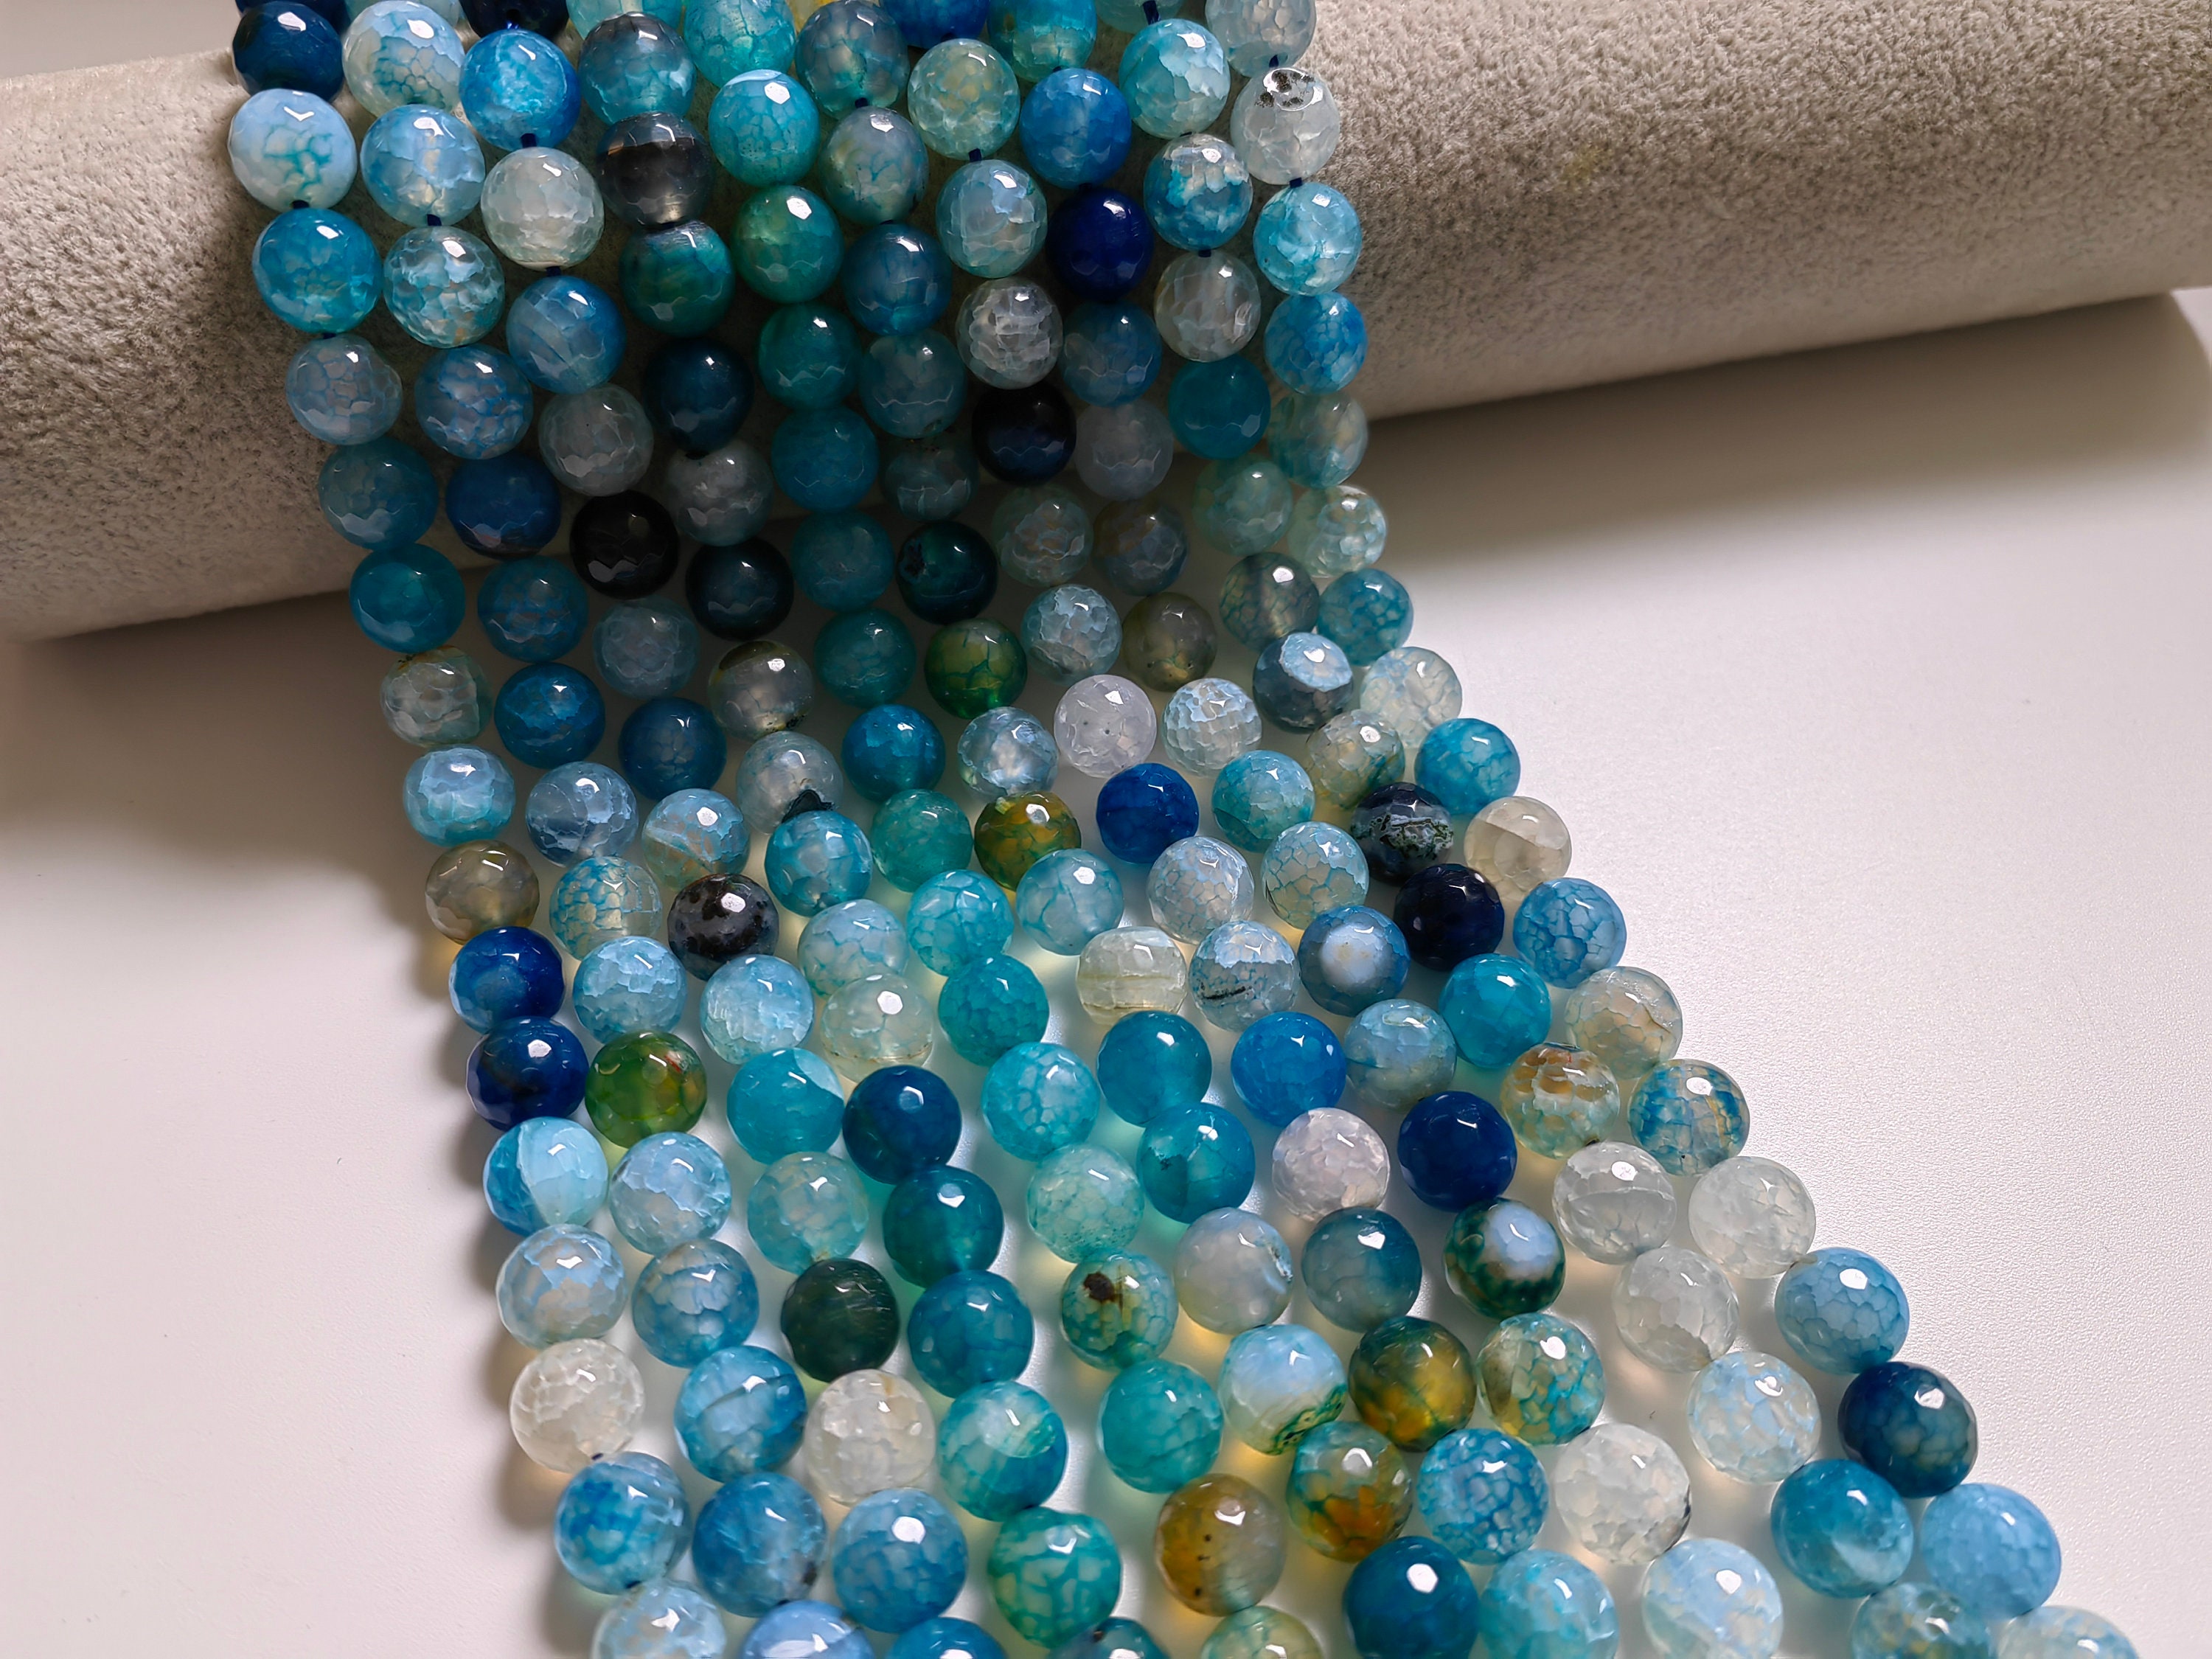 40x Blue Crackle Glass Beads, 4mm Blue Marbles Cracked Glass Beads, Blue  Crackled Glass Beads 4mm, Beading Supplies C769